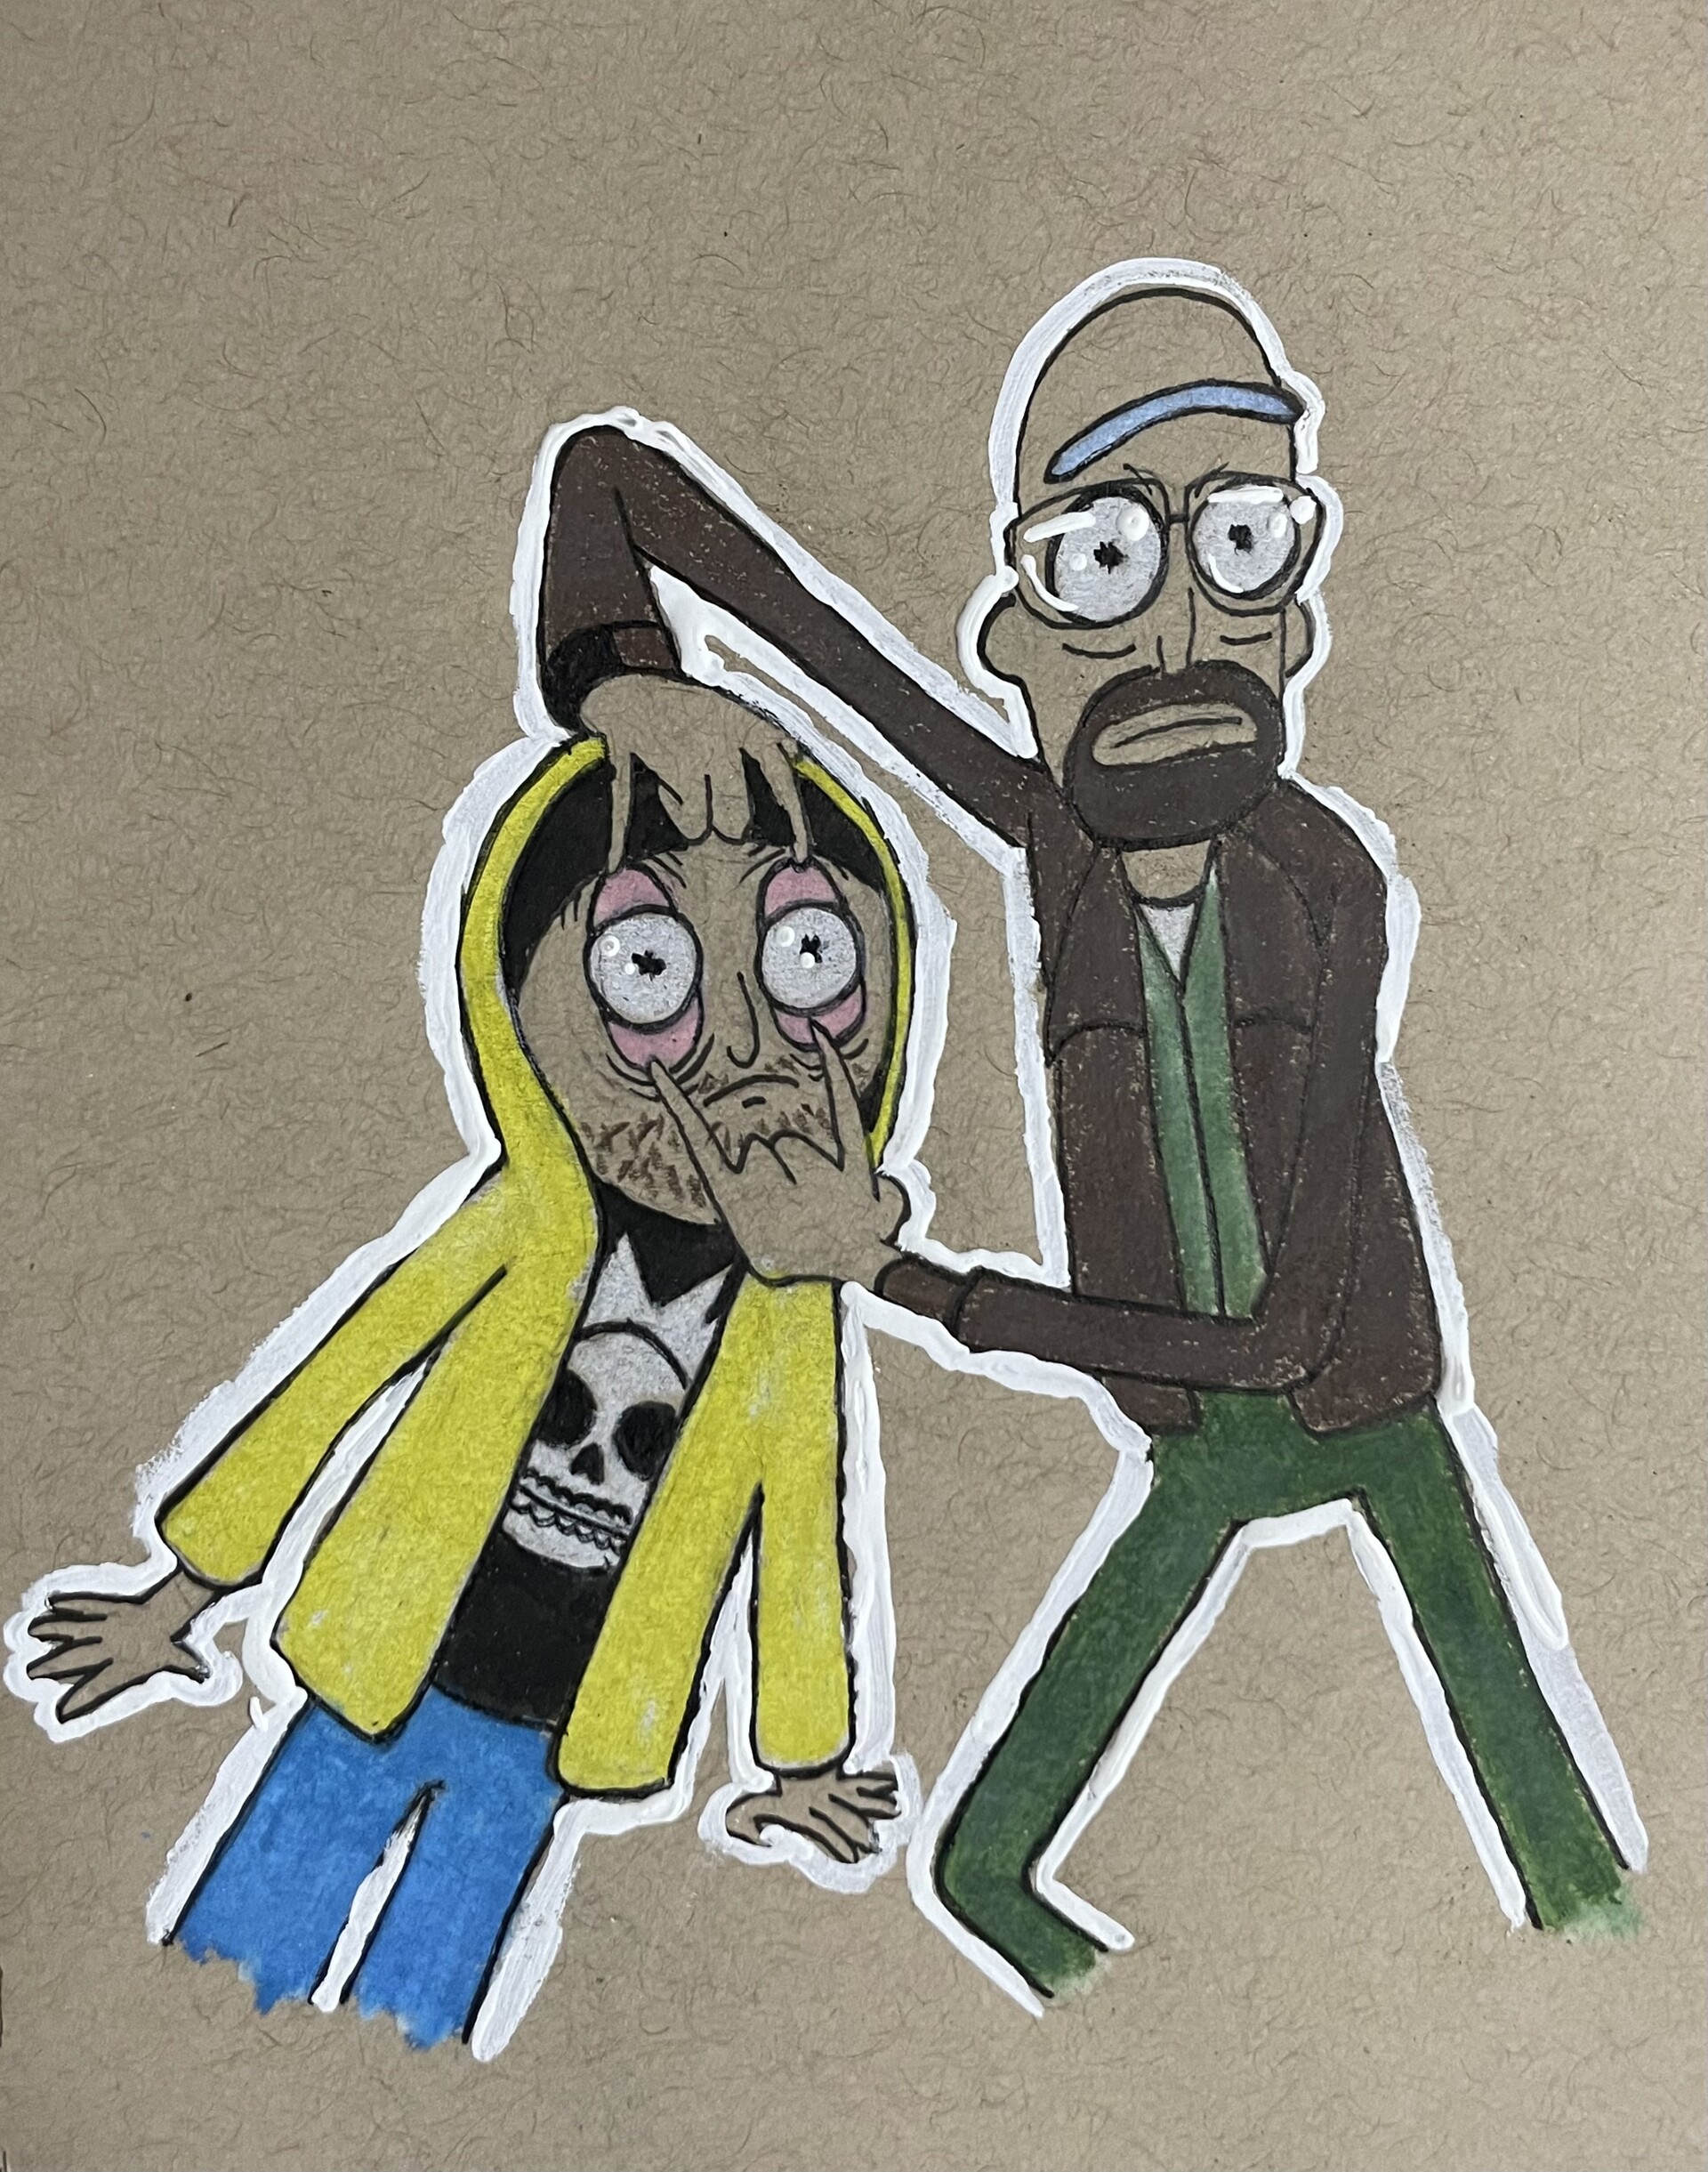 breaking bad crossover with rick and morty, fanart